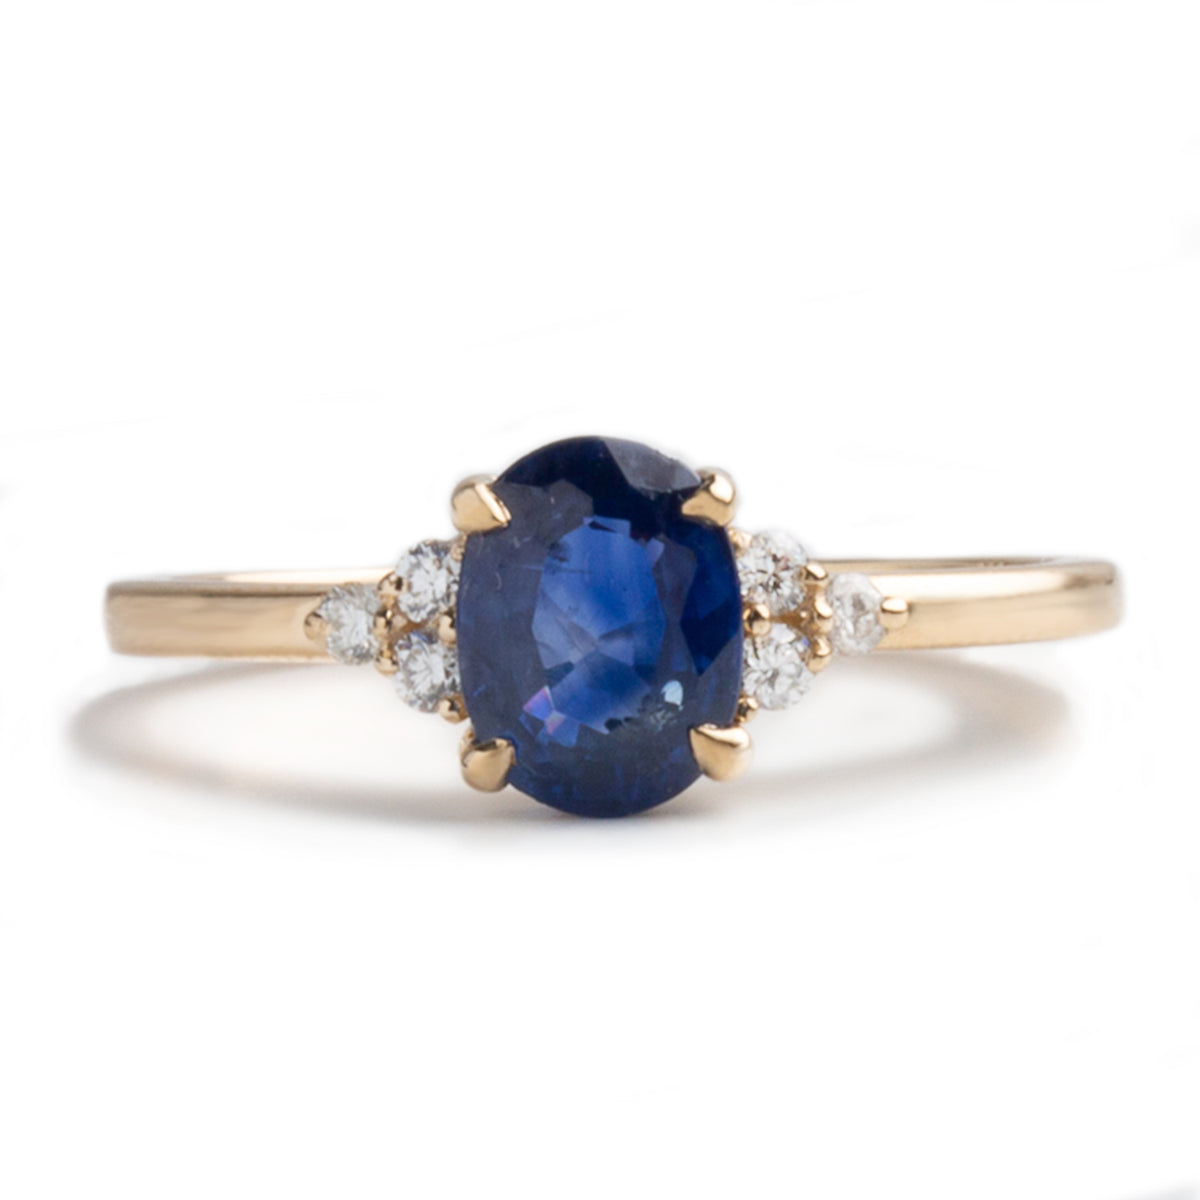 14k yellow gold 1.20ct oval cut blue sapphire diamond trio side stones engagement ring